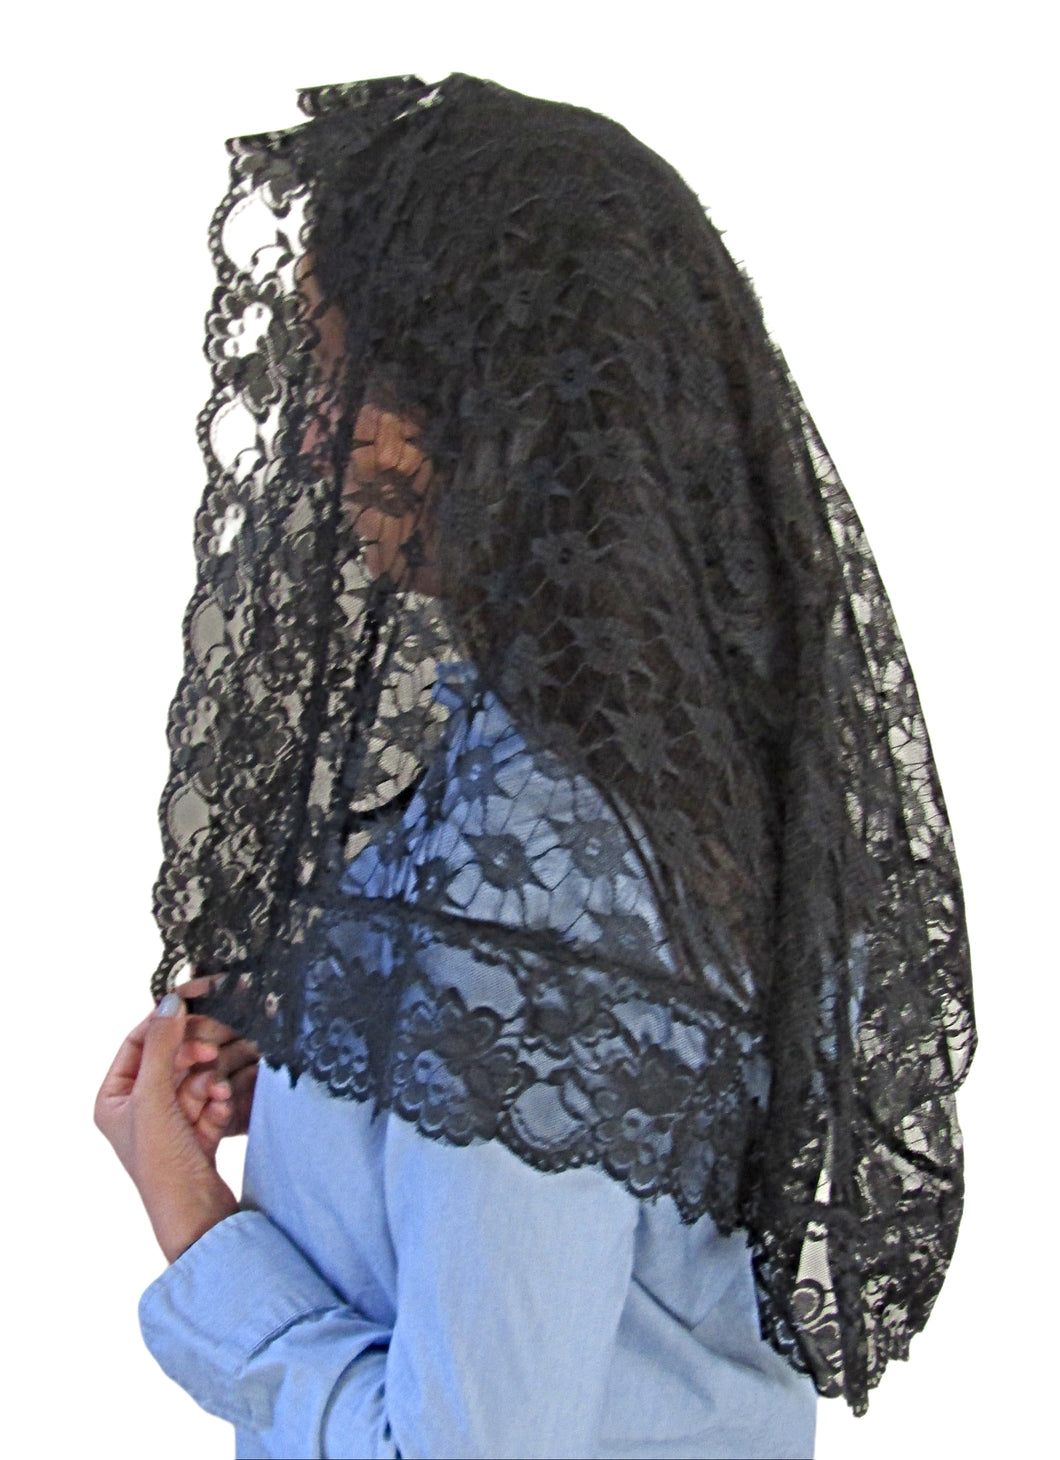 mds - Lace with lace trimmed mantilla #2100